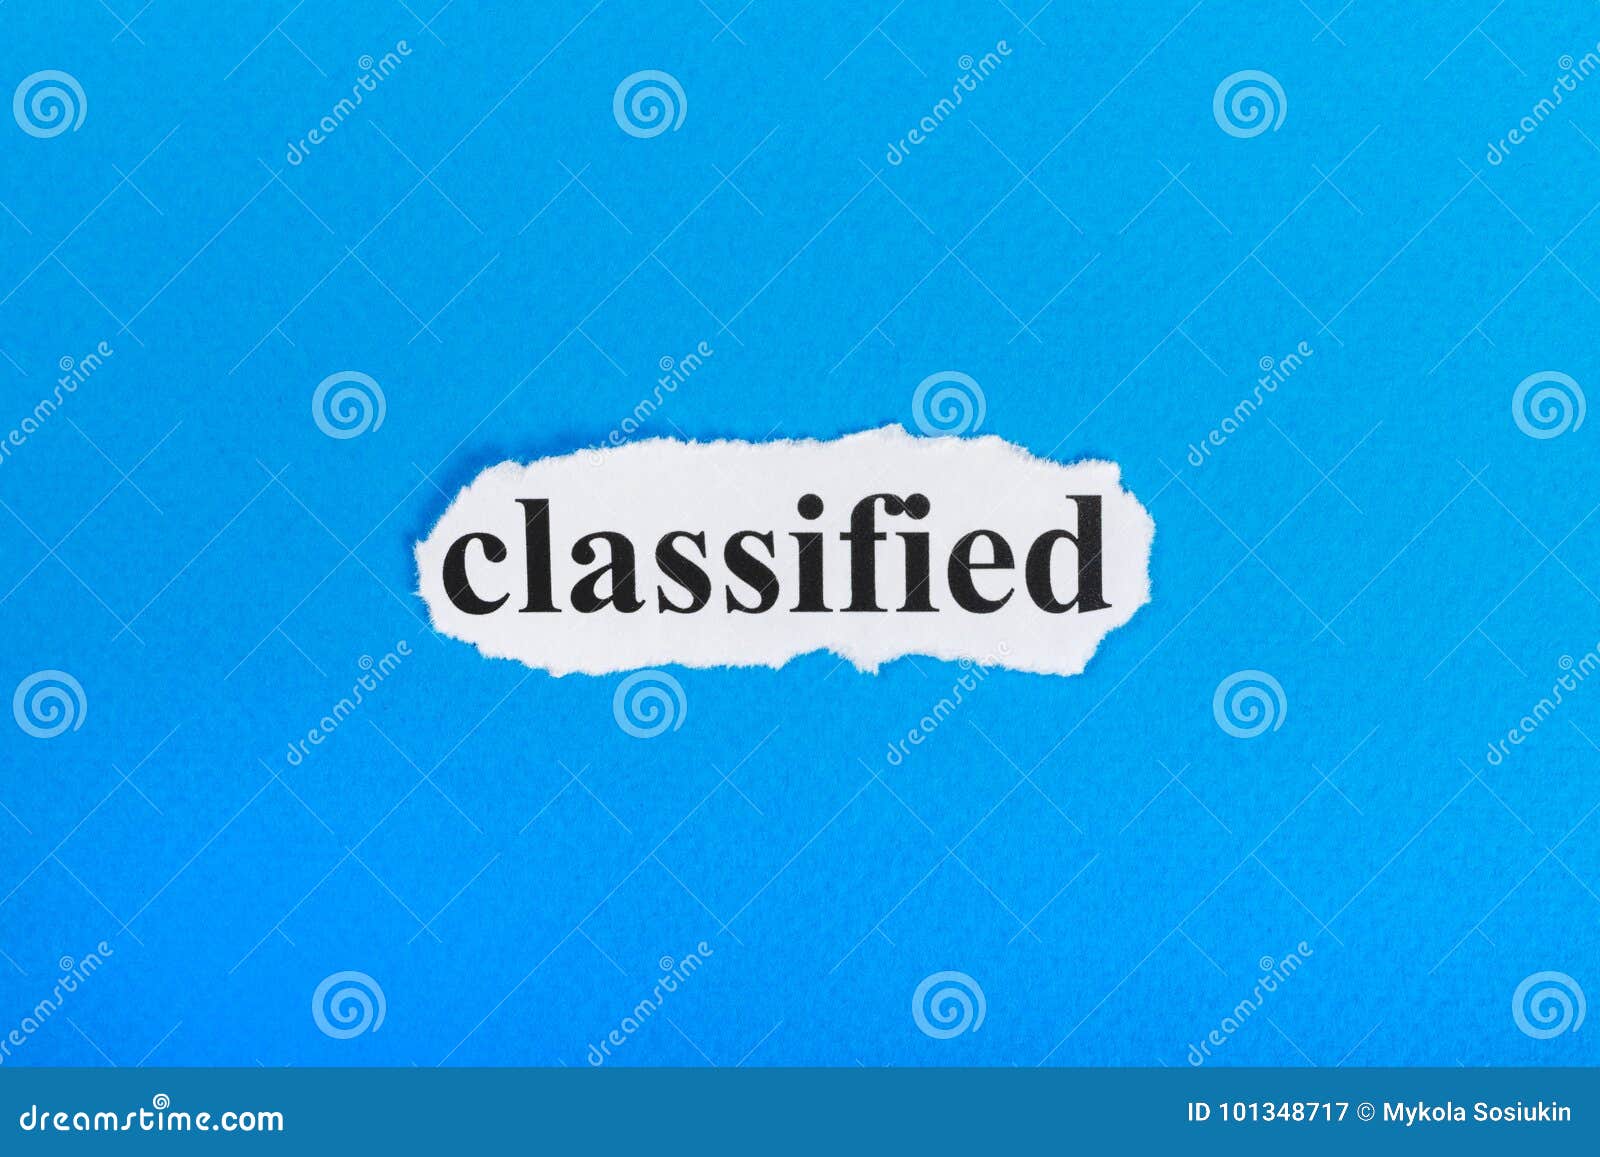 classified text on paper. word classified on torn paper. concept image